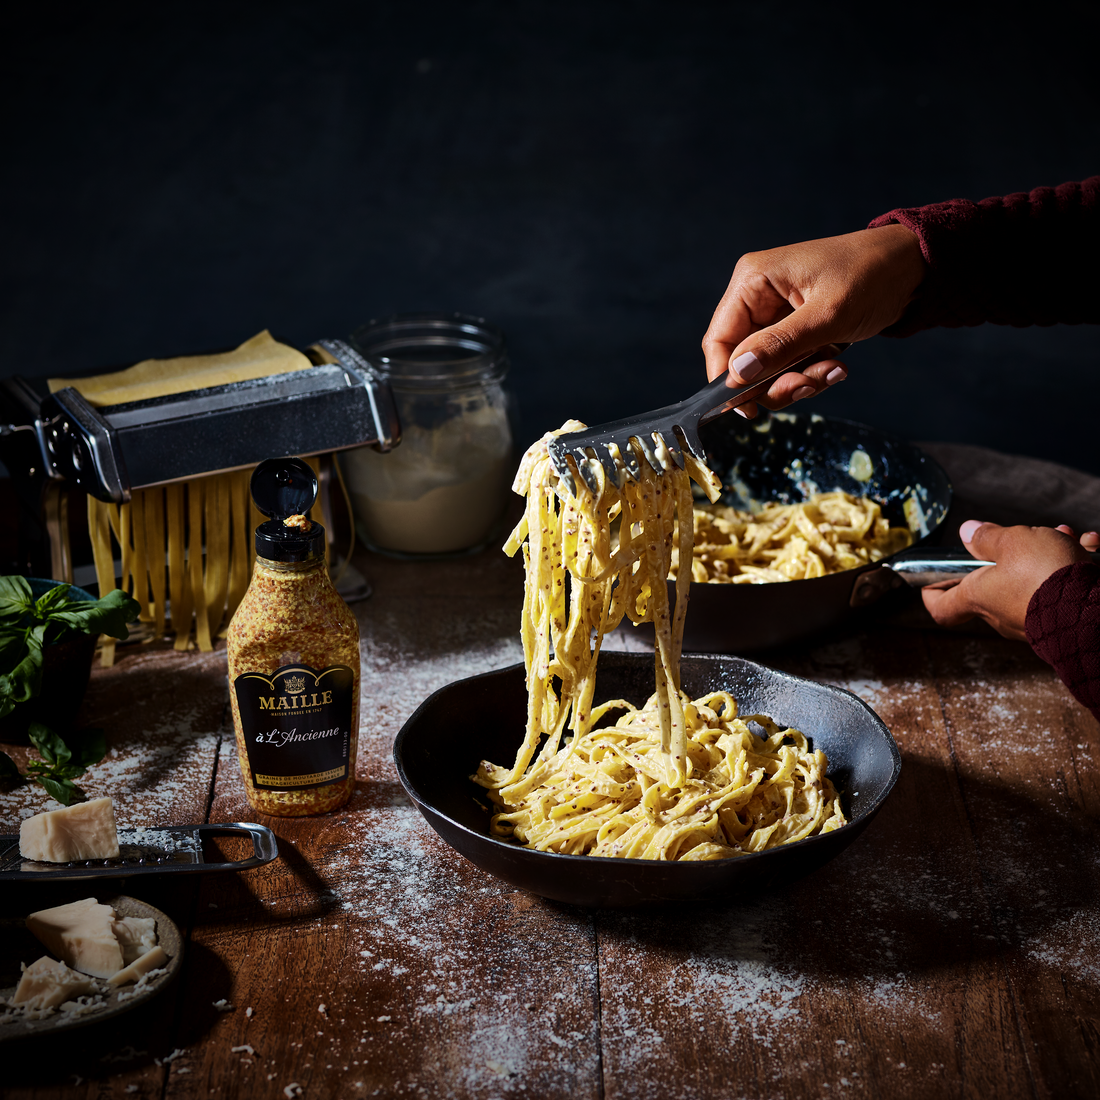 Maille White Truffle And Parmesan mustard Pasta image